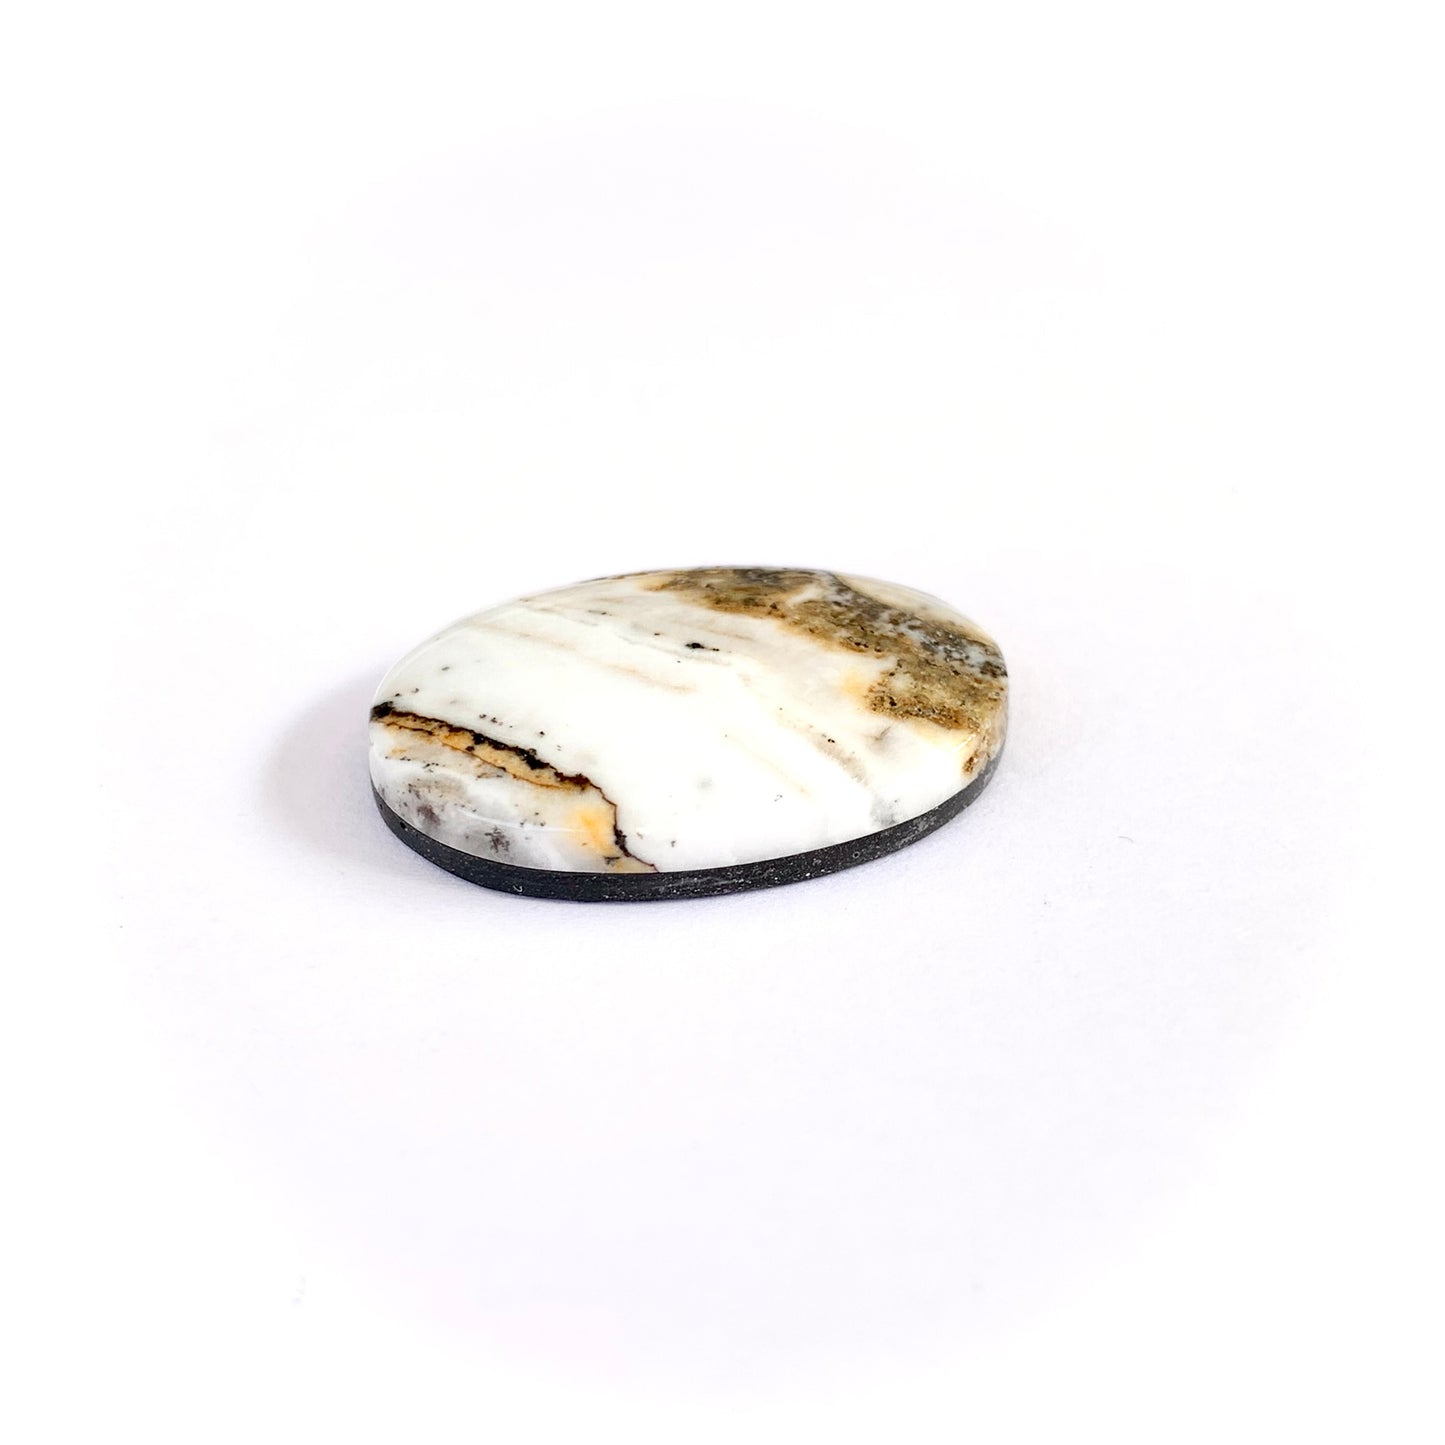 Calico Silver Lace Onyx, 15.60 cts